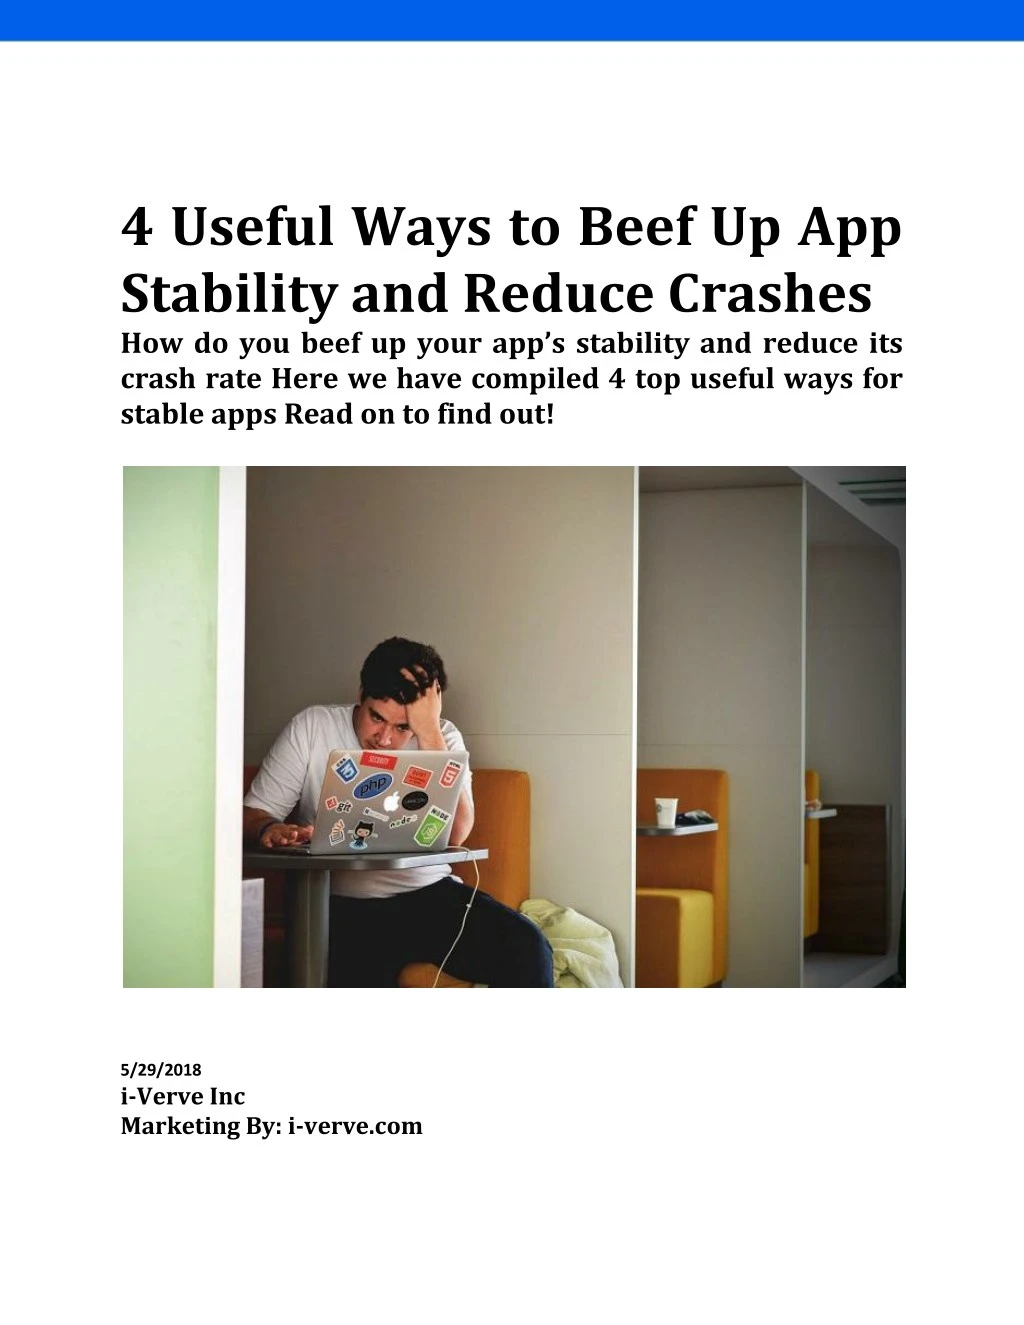 4 useful ways to beef up app stability and reduce